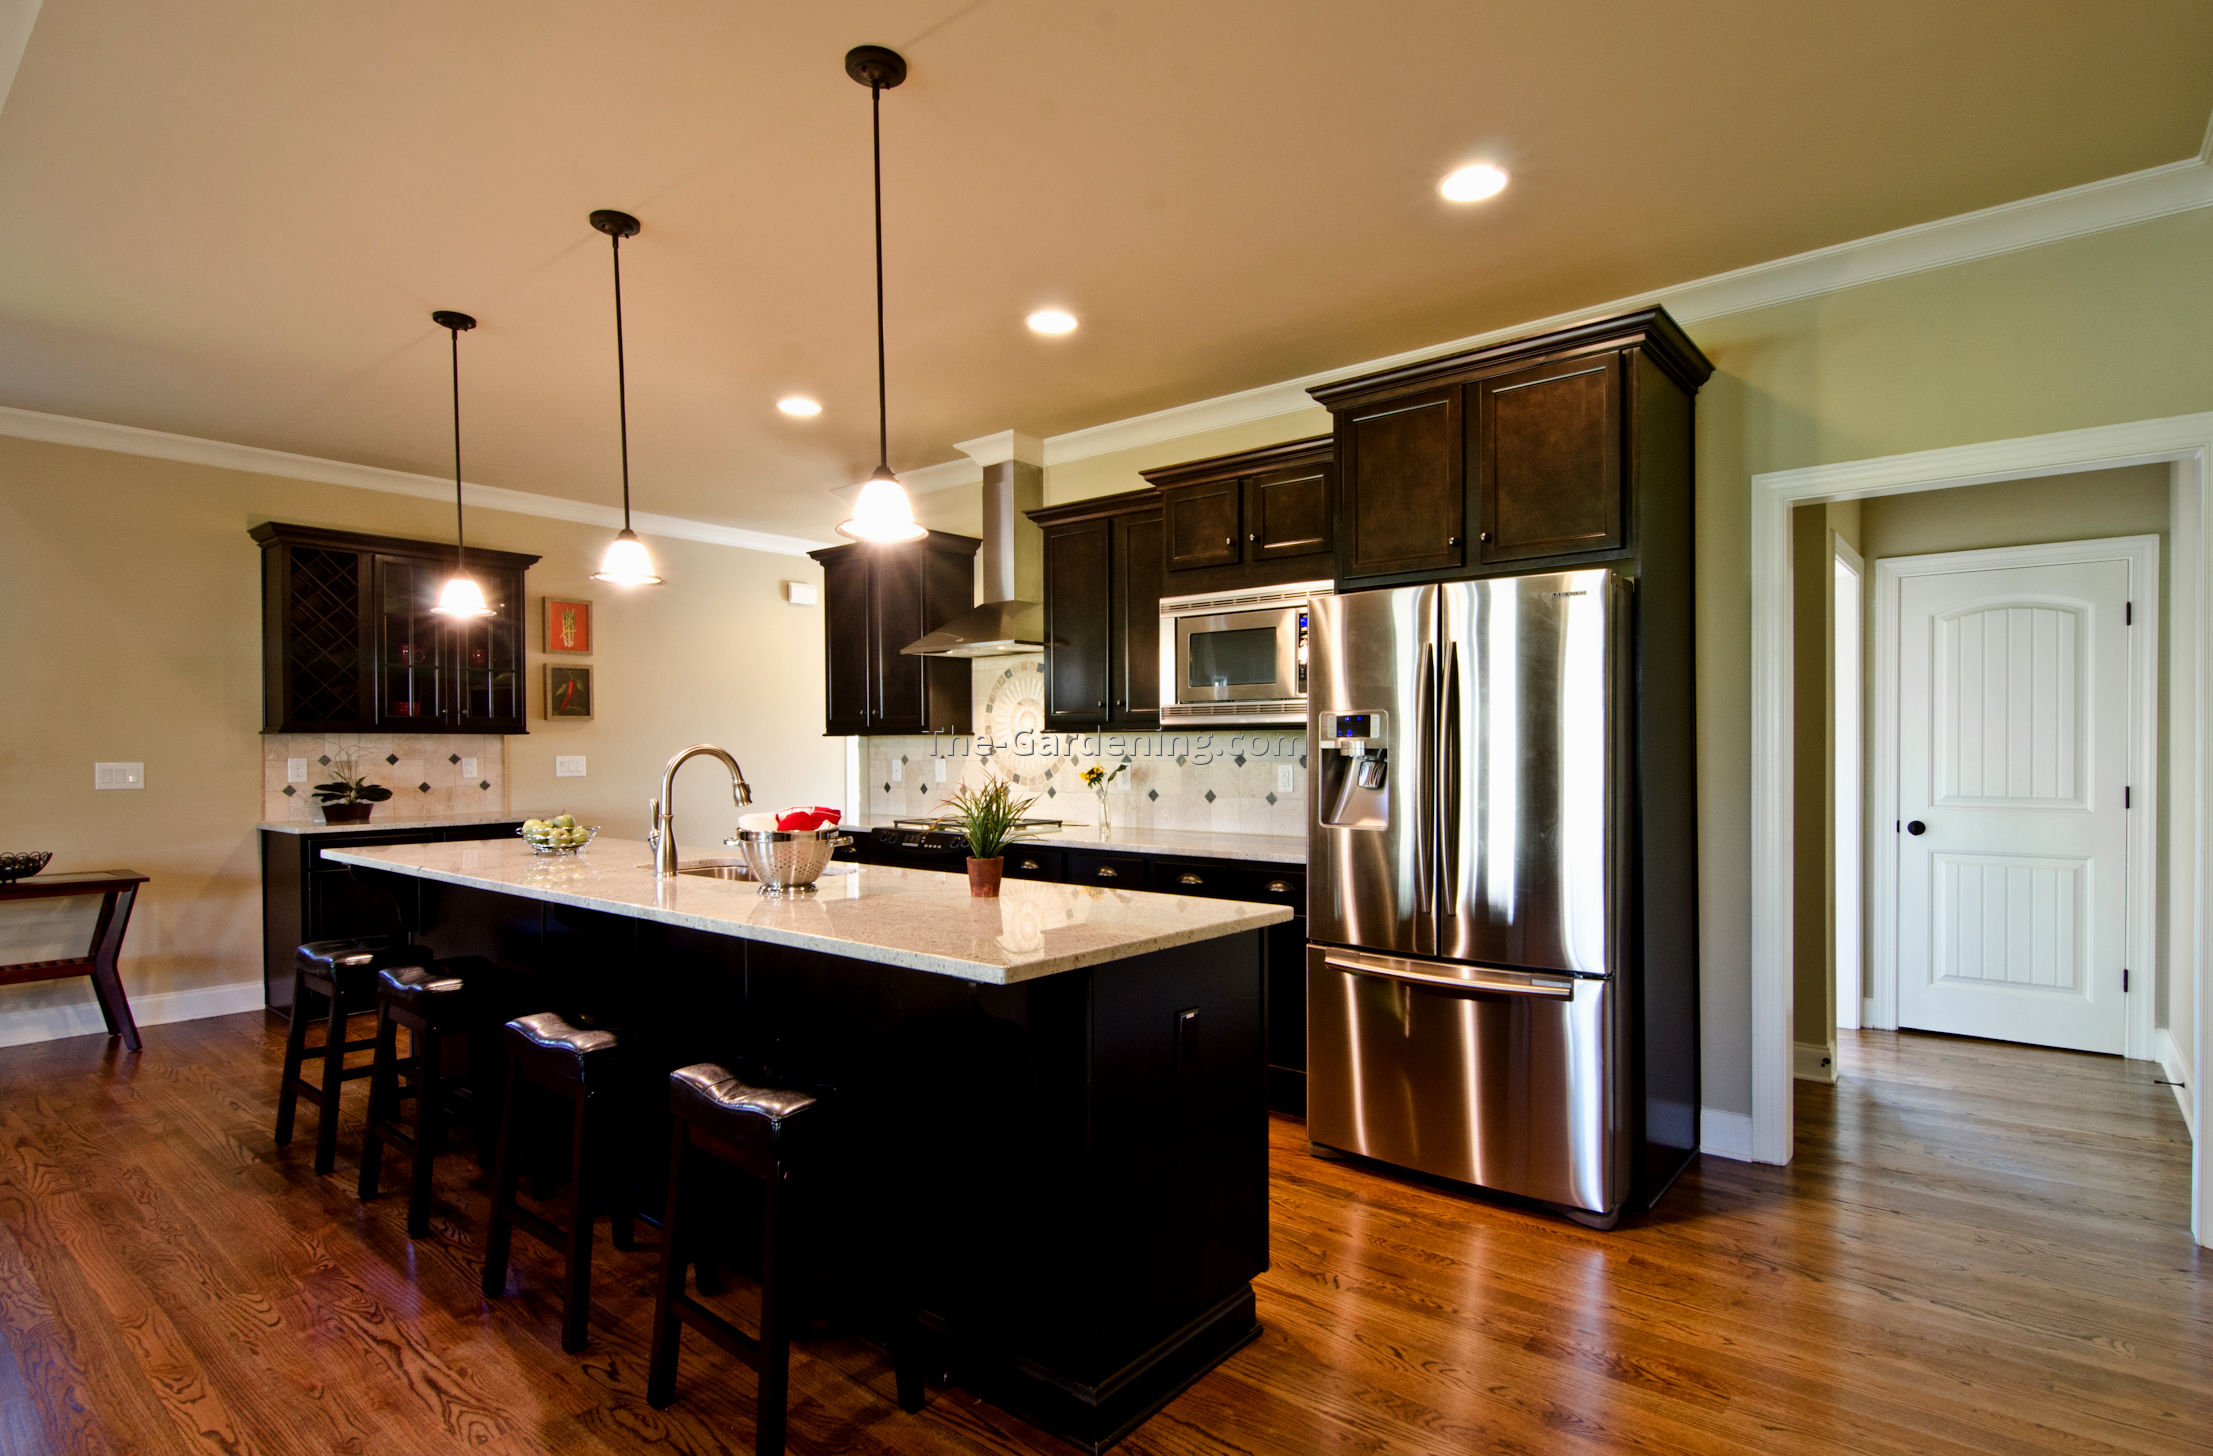 average cost to replace kitchen lighting